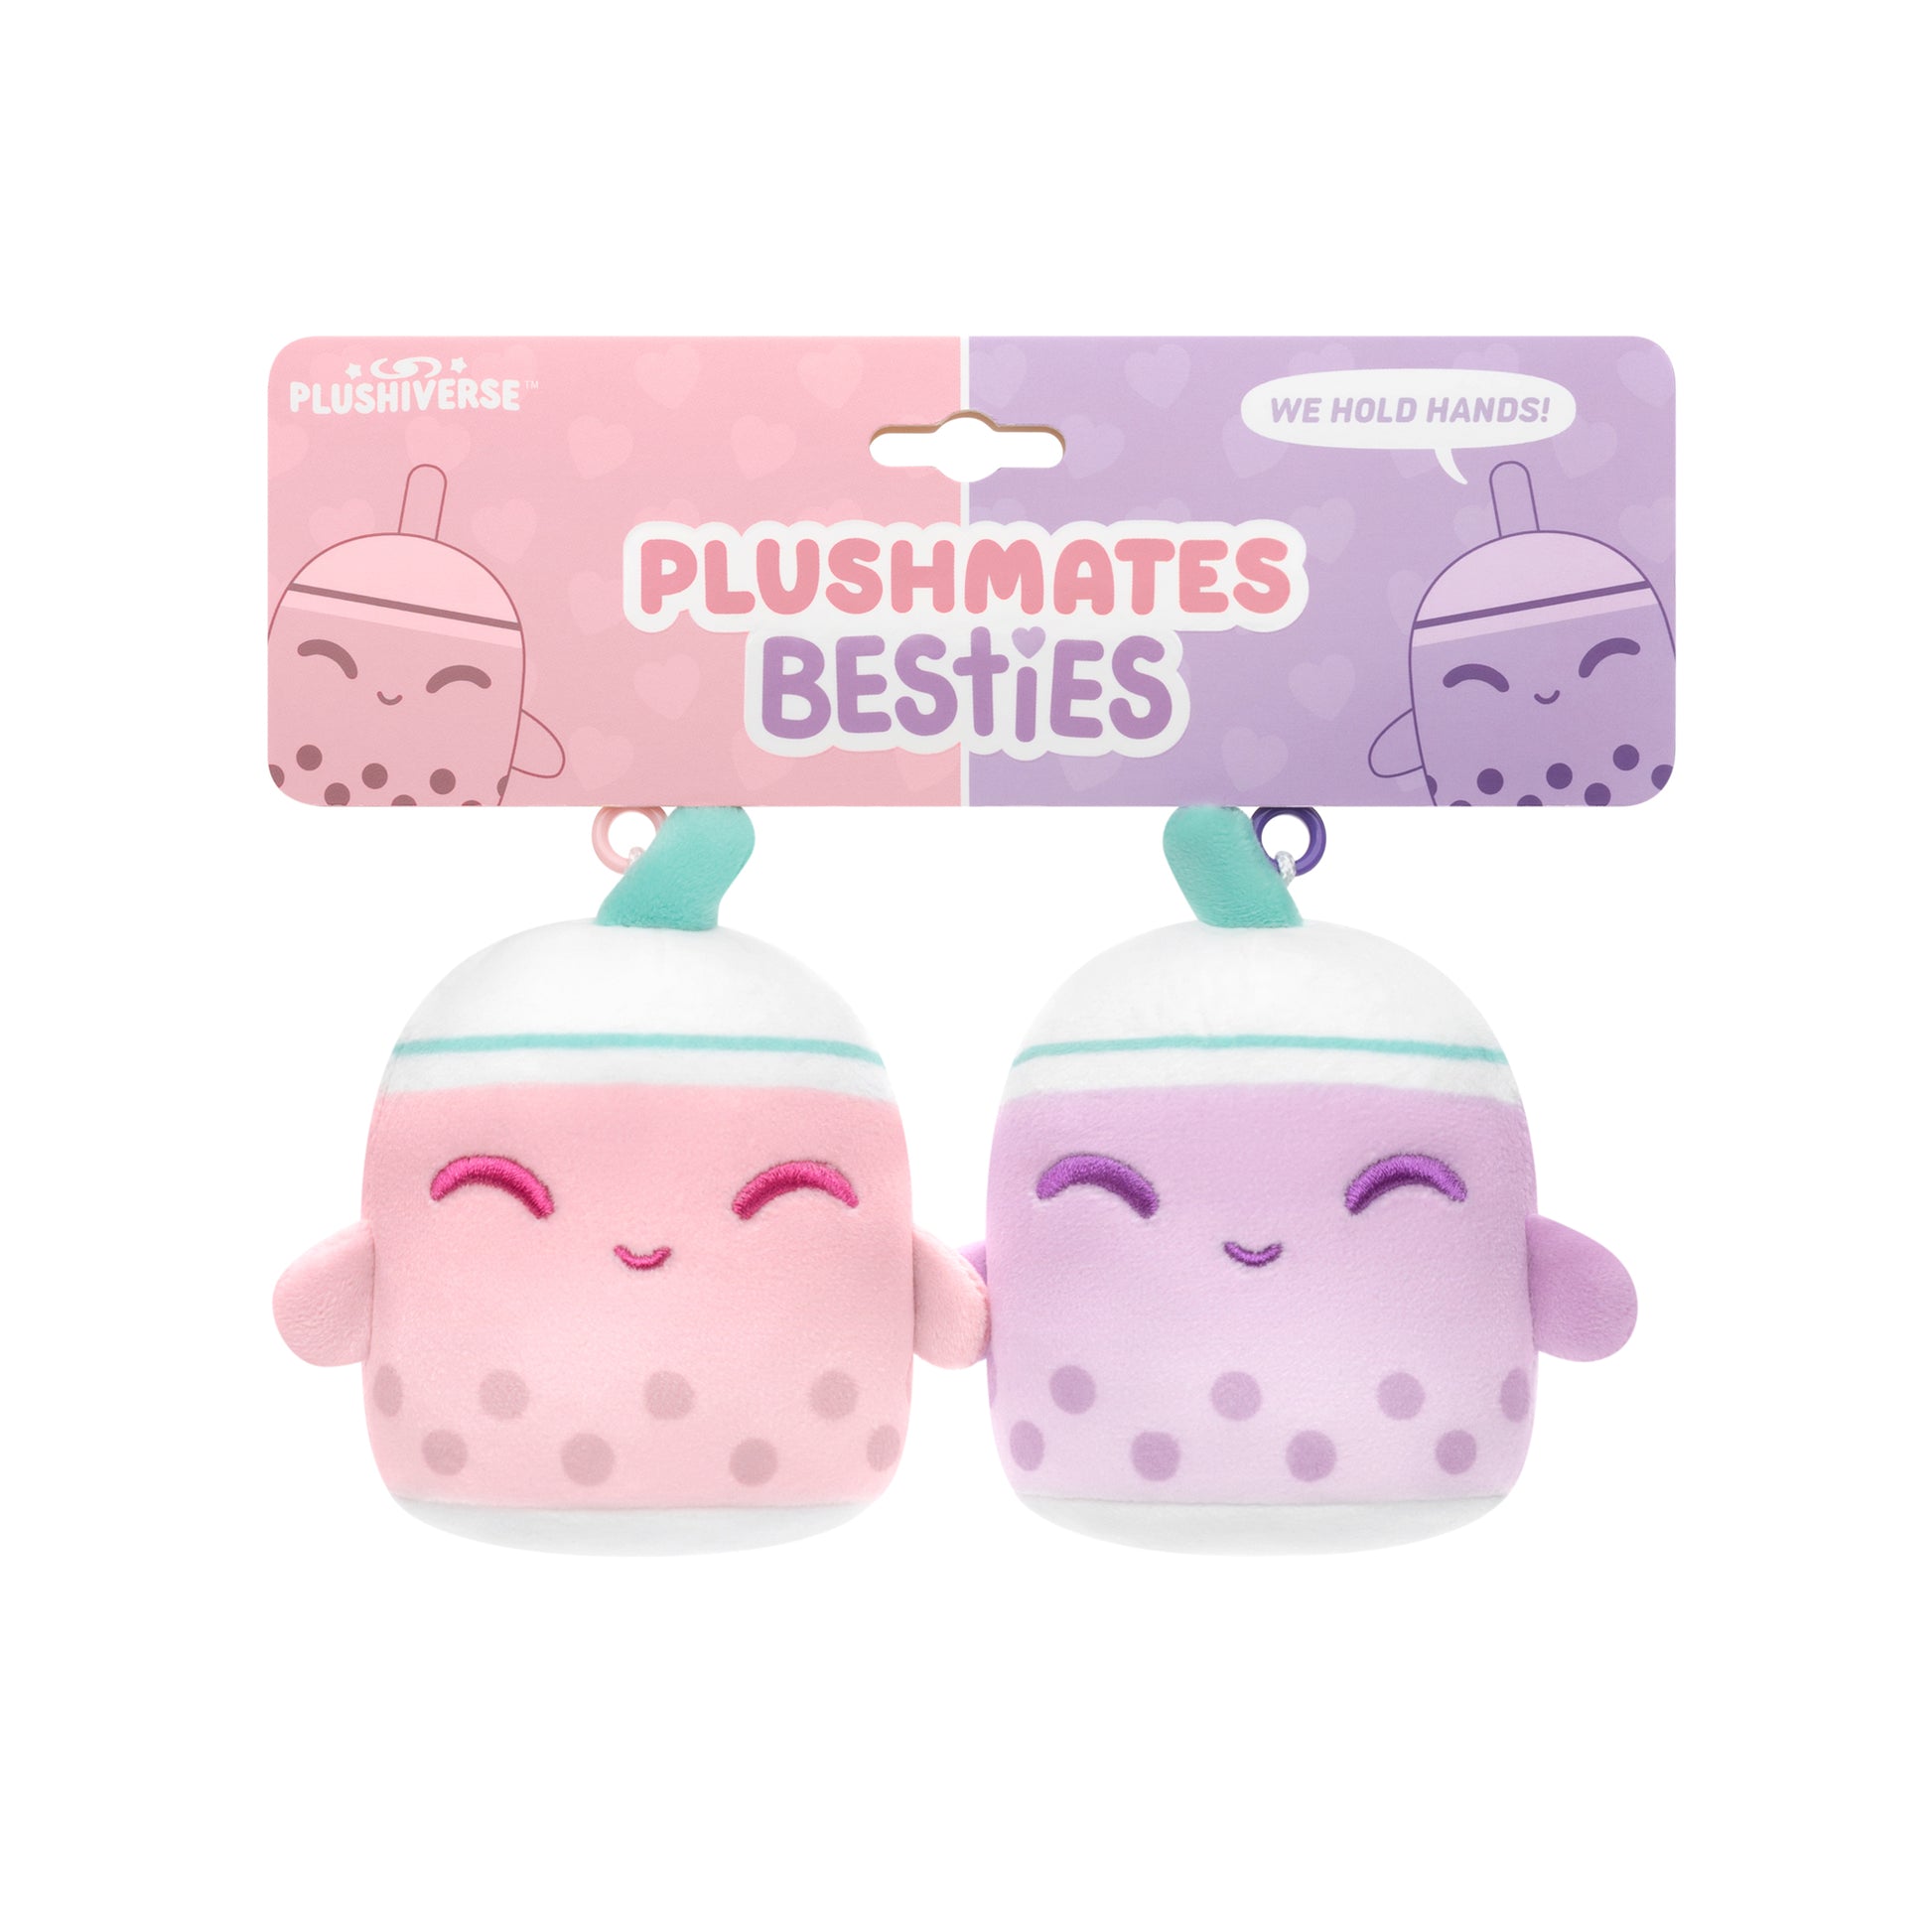 Two Pinkiverse Boba Buddies Plushmates Besties, perfect as Valentine's Day plushmates or bag charms in a TeeTurtle package.